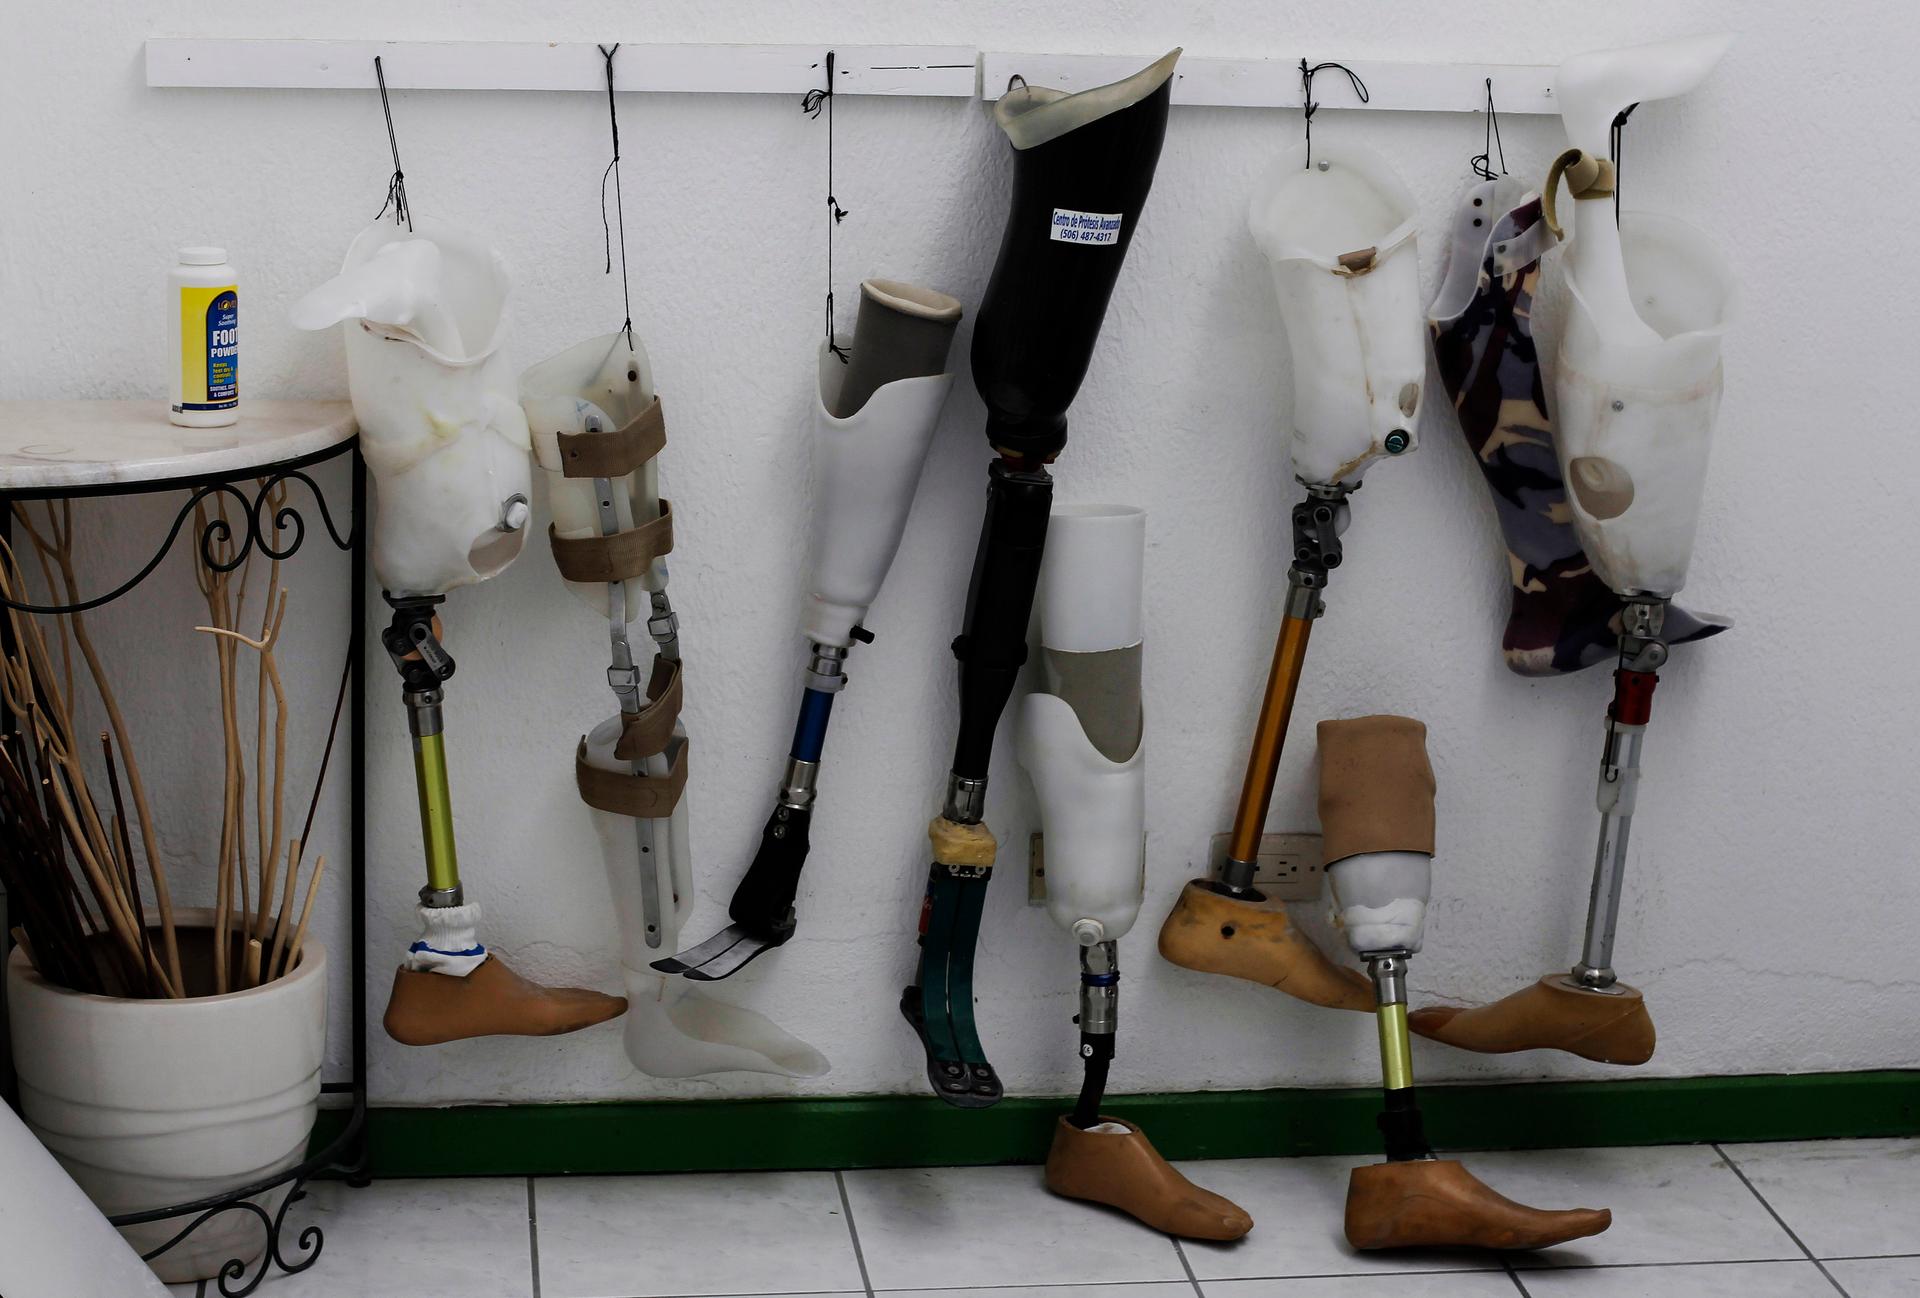 Used prosthetic legs are seen at the Center of Advanced Prosthetics in San Jose